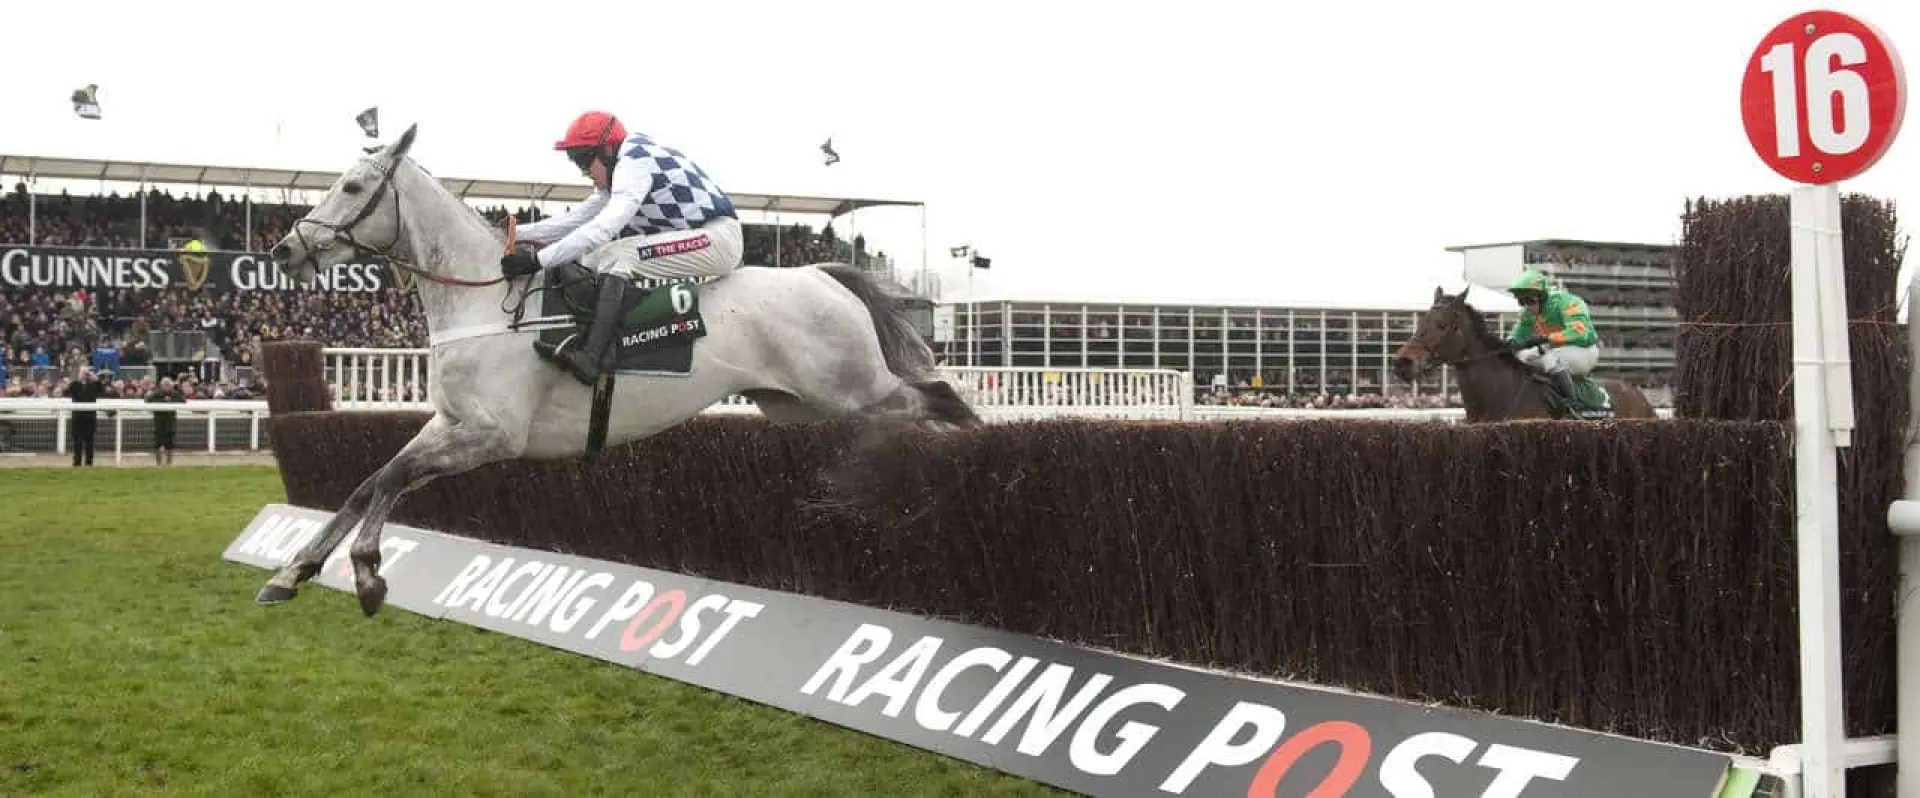 Simonsig odds and Top Gamble bets are Coral experts' Shloer Chase tips from The Open meeting at Cheltenham.